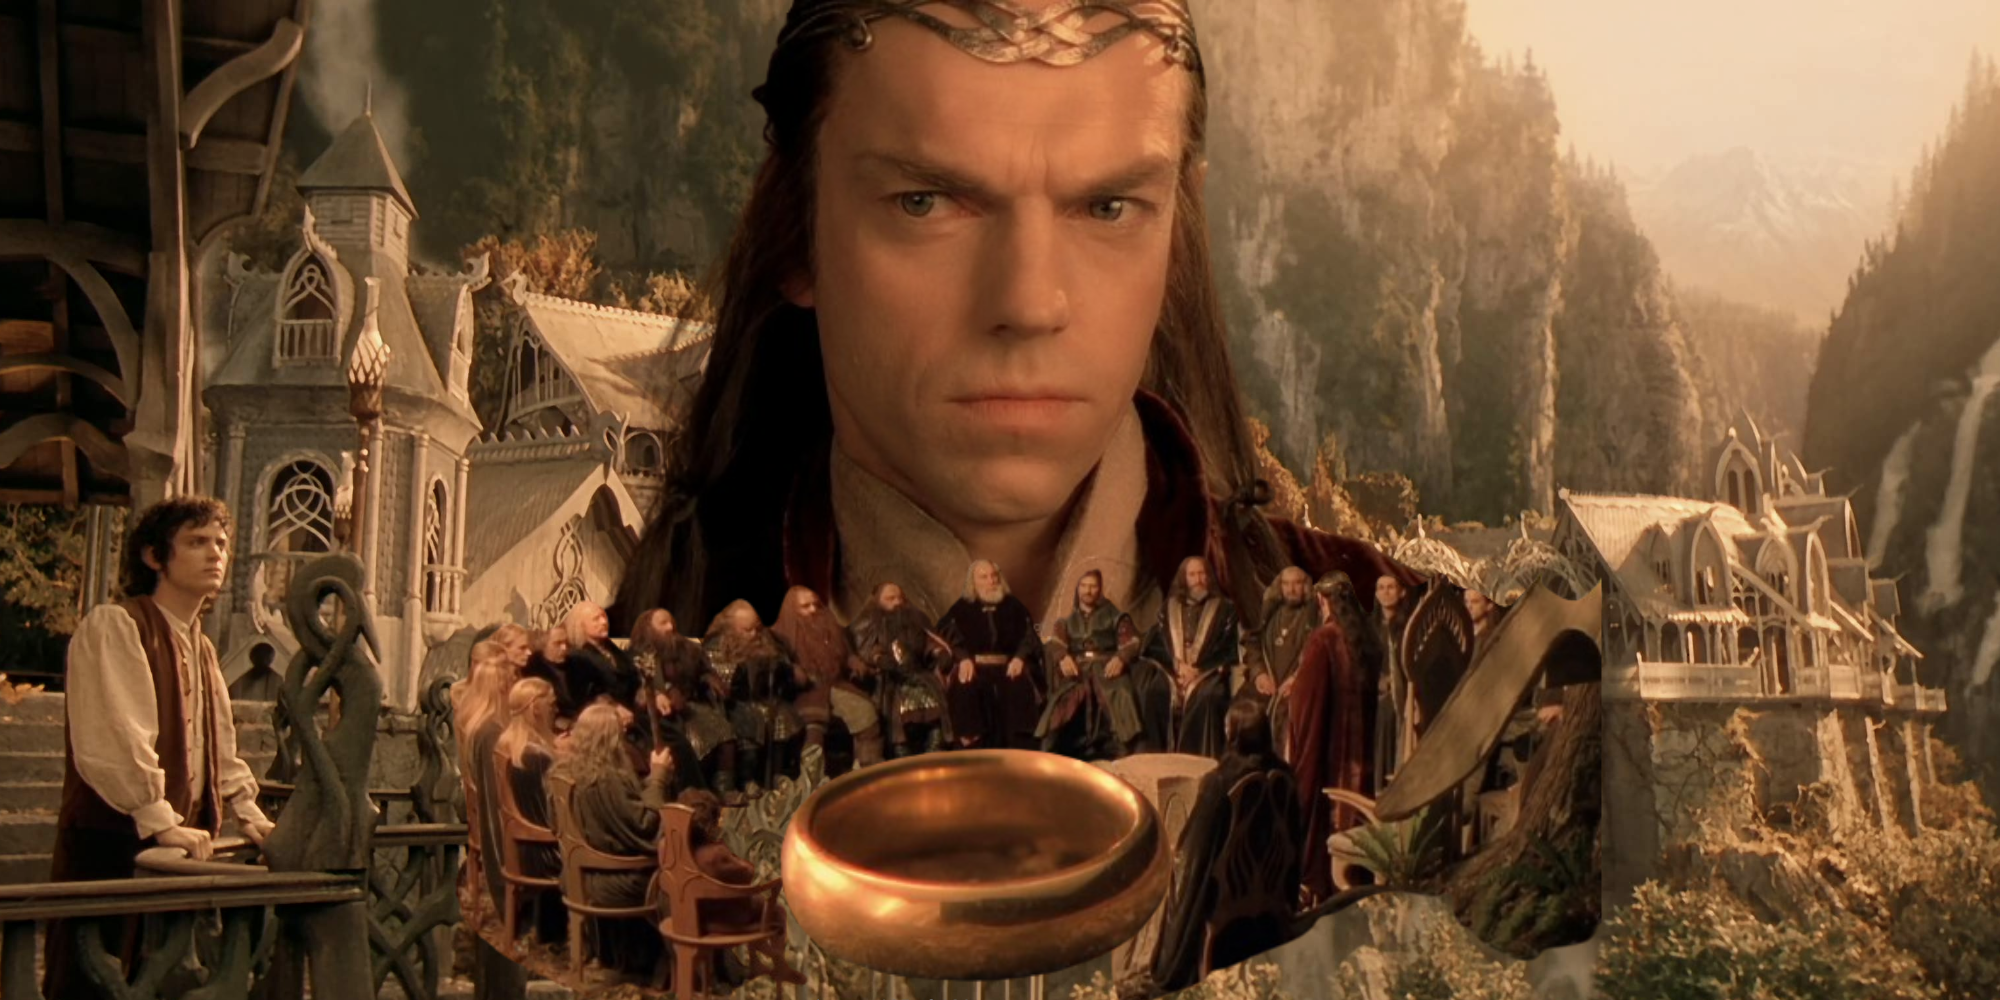 Feature image with Elrond, the council, Frodo, and the One Ring